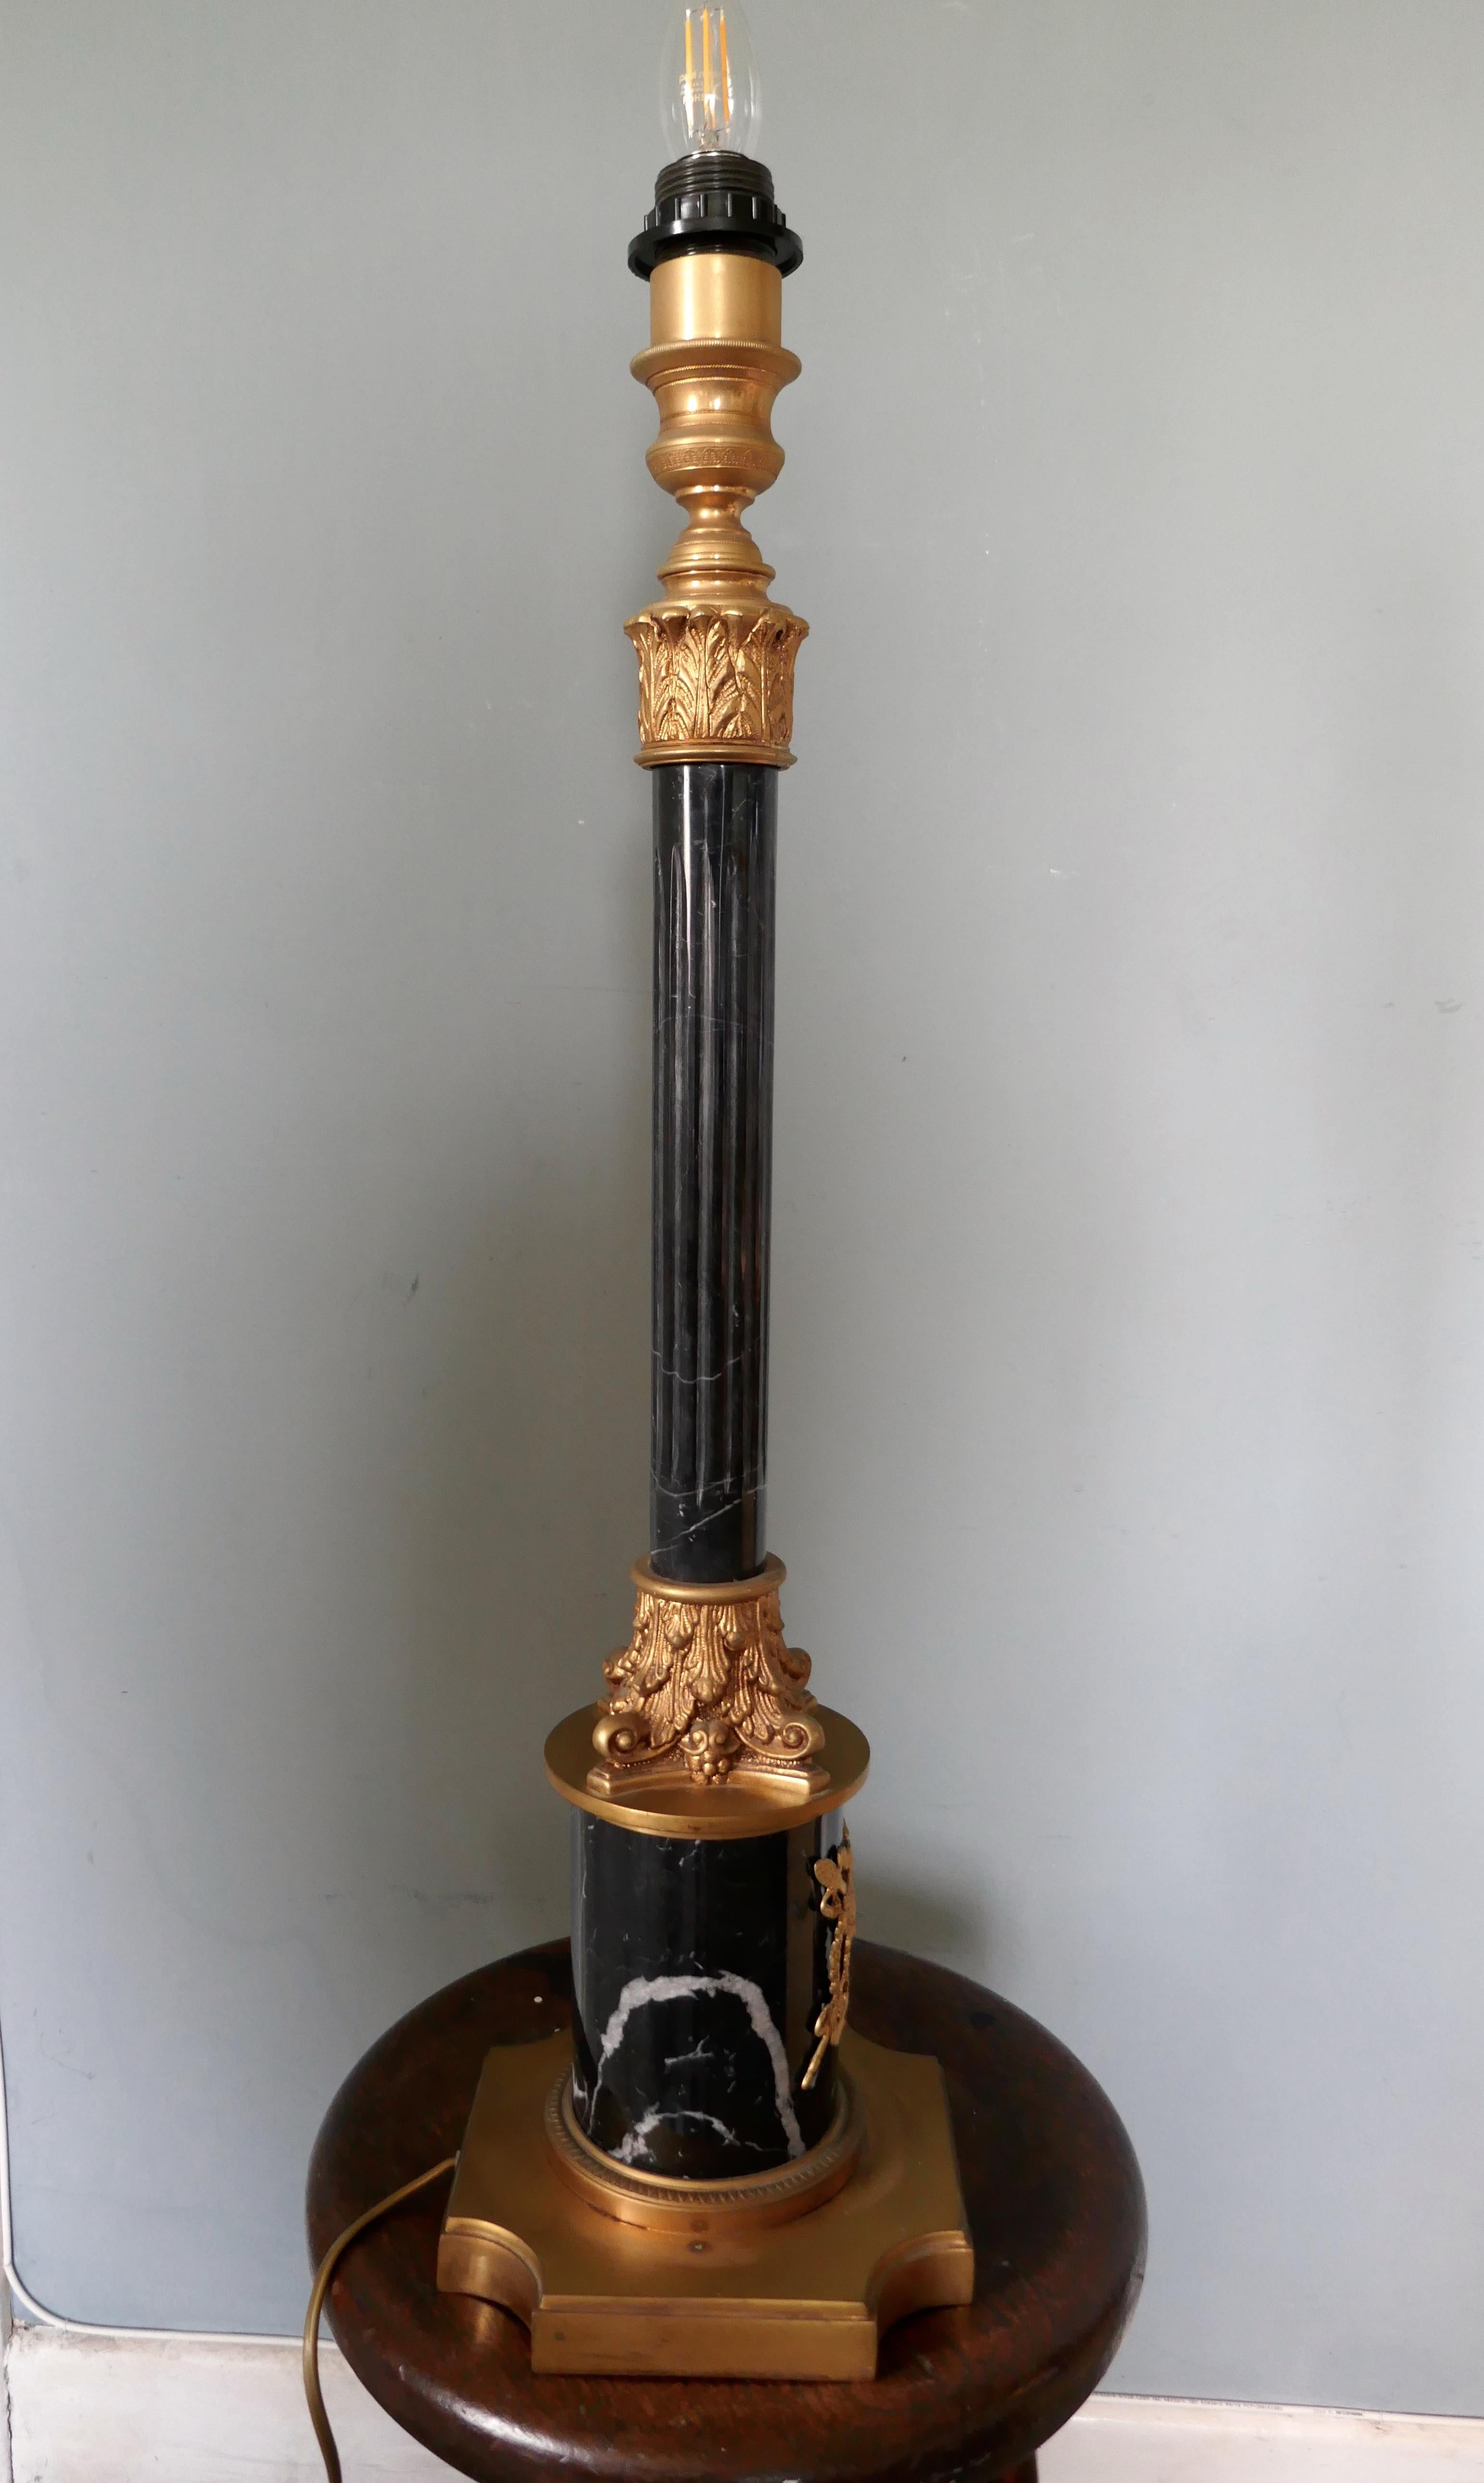 Very Tall Marble Corinthian Column Table Lamp

This is very heavy piece it is made in solid marble and brass, the lamp has a single fluted marble corinthian style columns set on a marble and brass base
This is a very attractive piece larger than